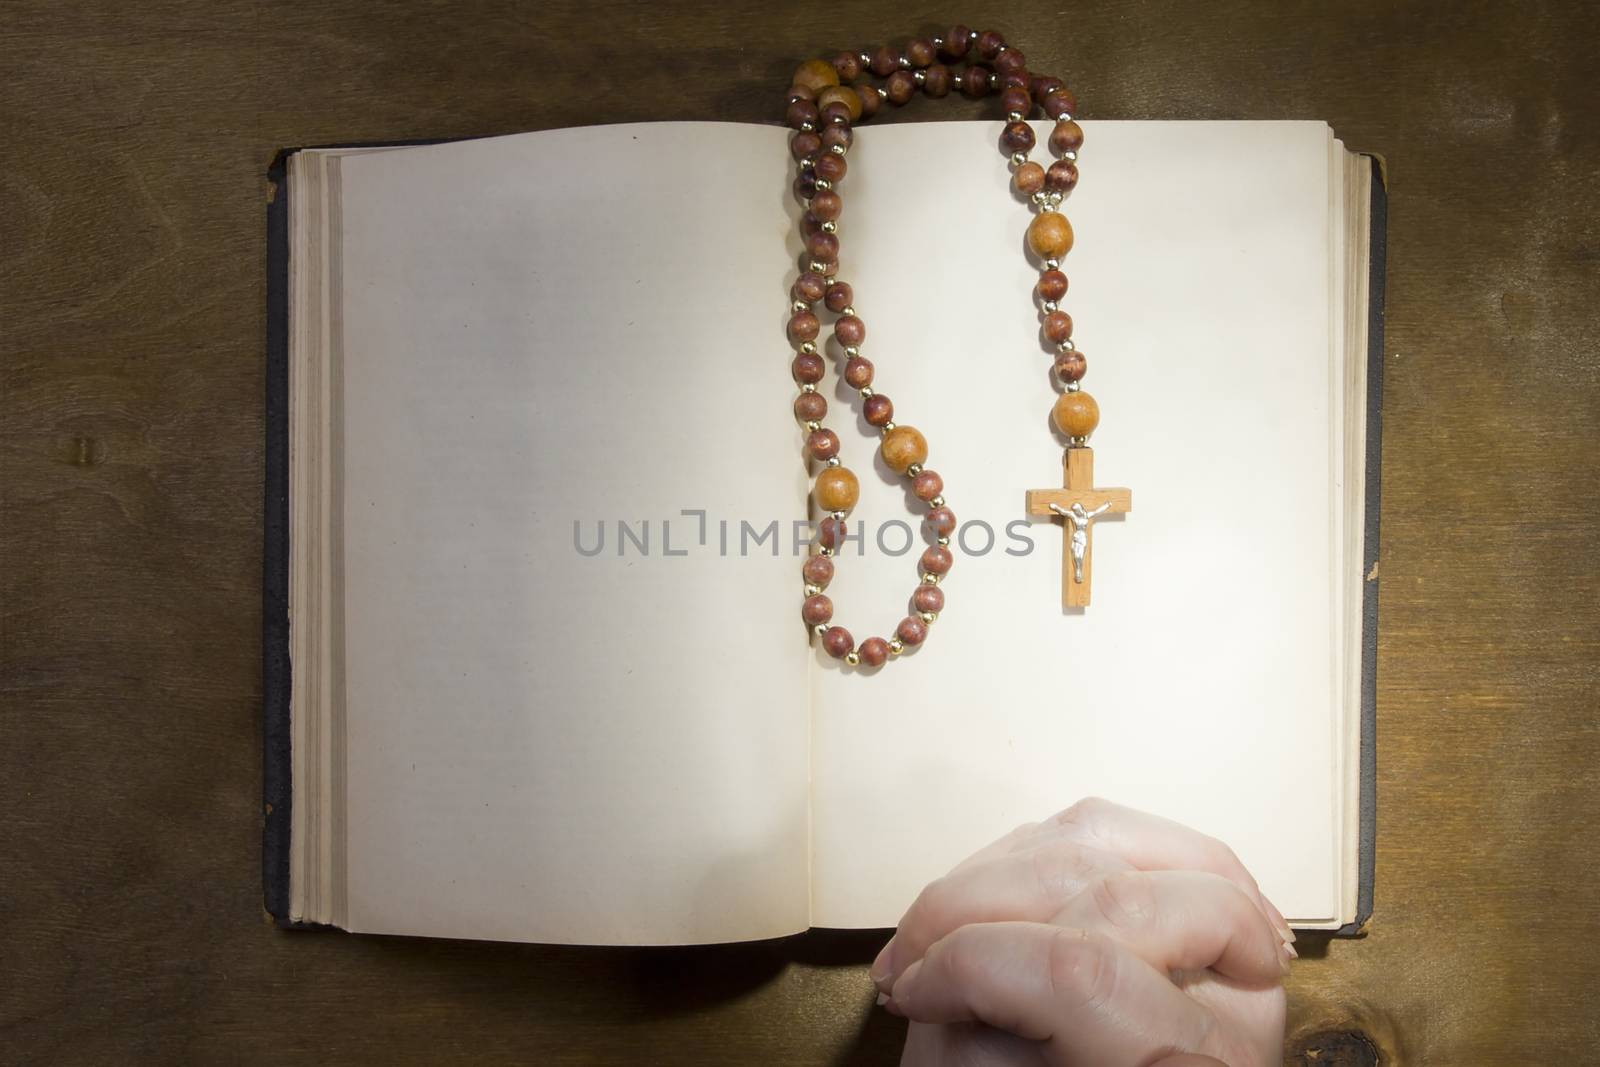 Female hands with rosary and an old book